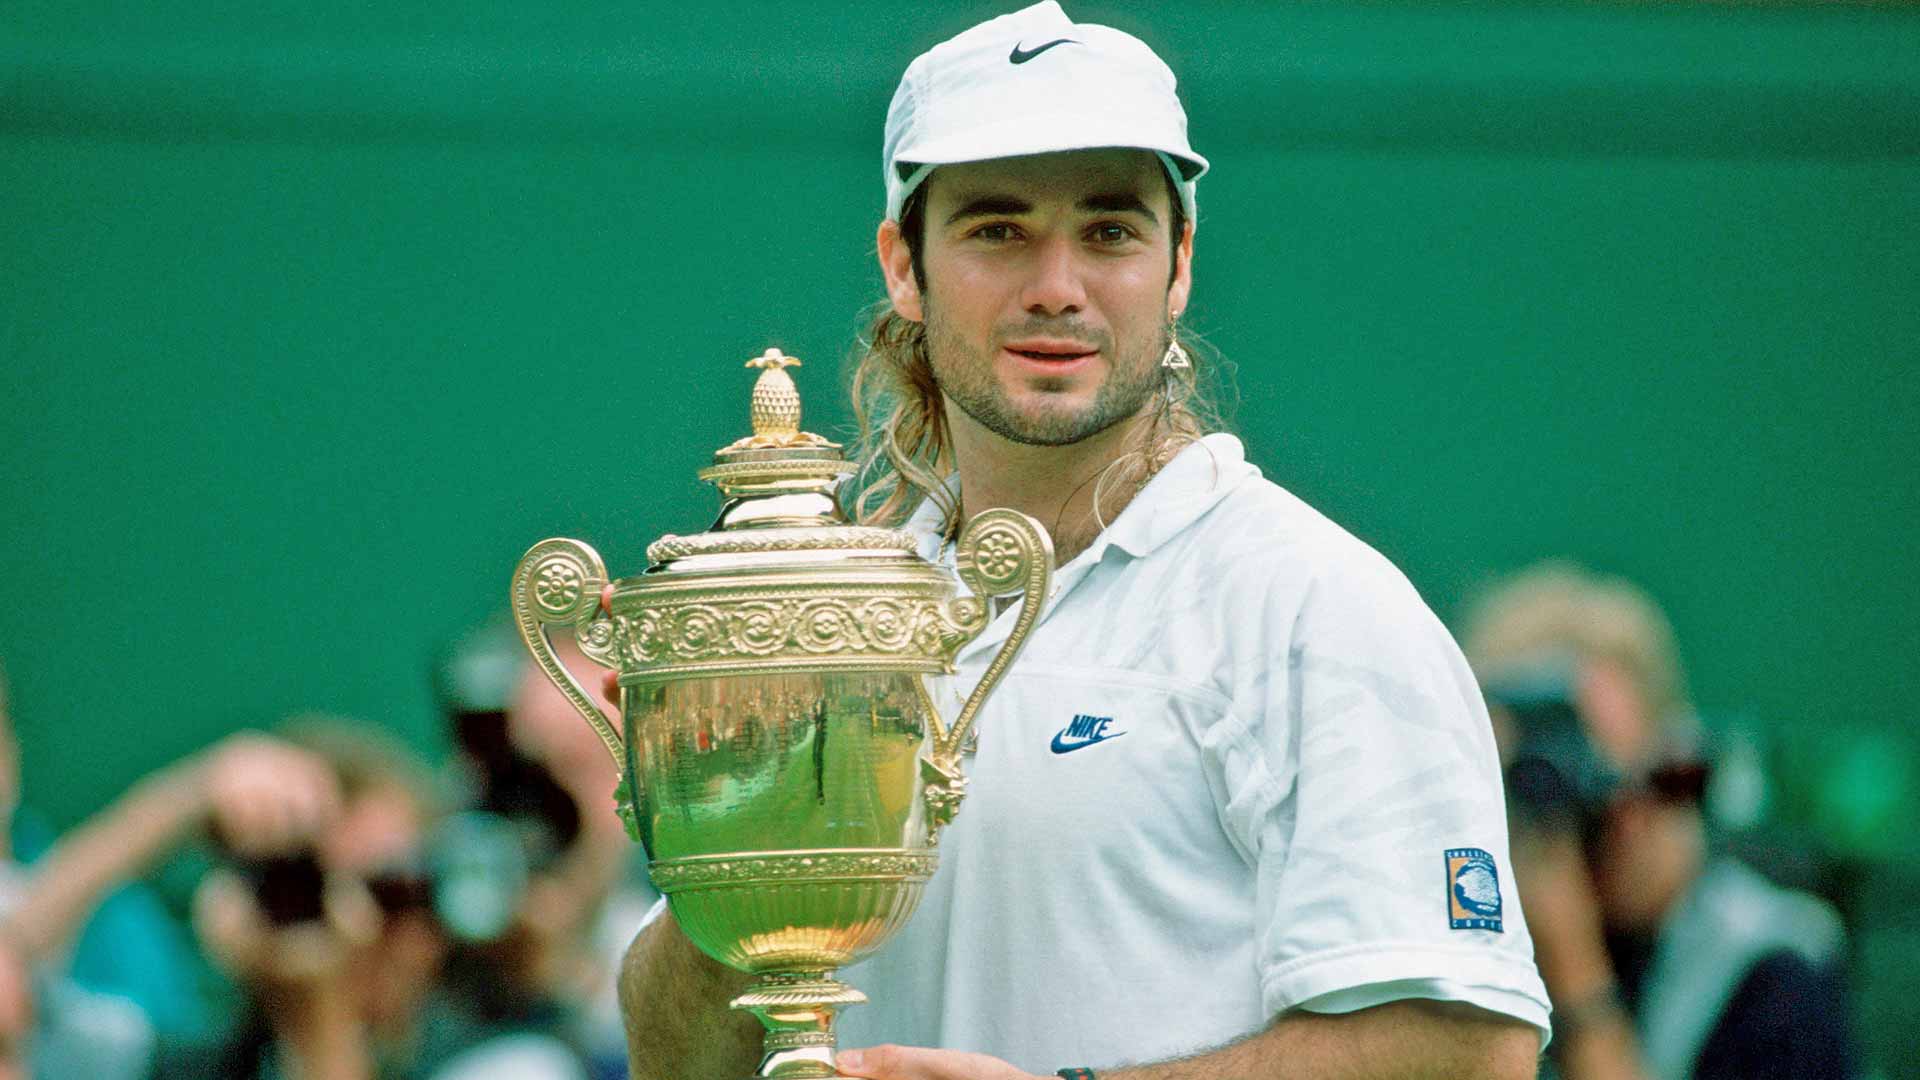 Andre Agassi captures his lone Wimbledon title in 1992.